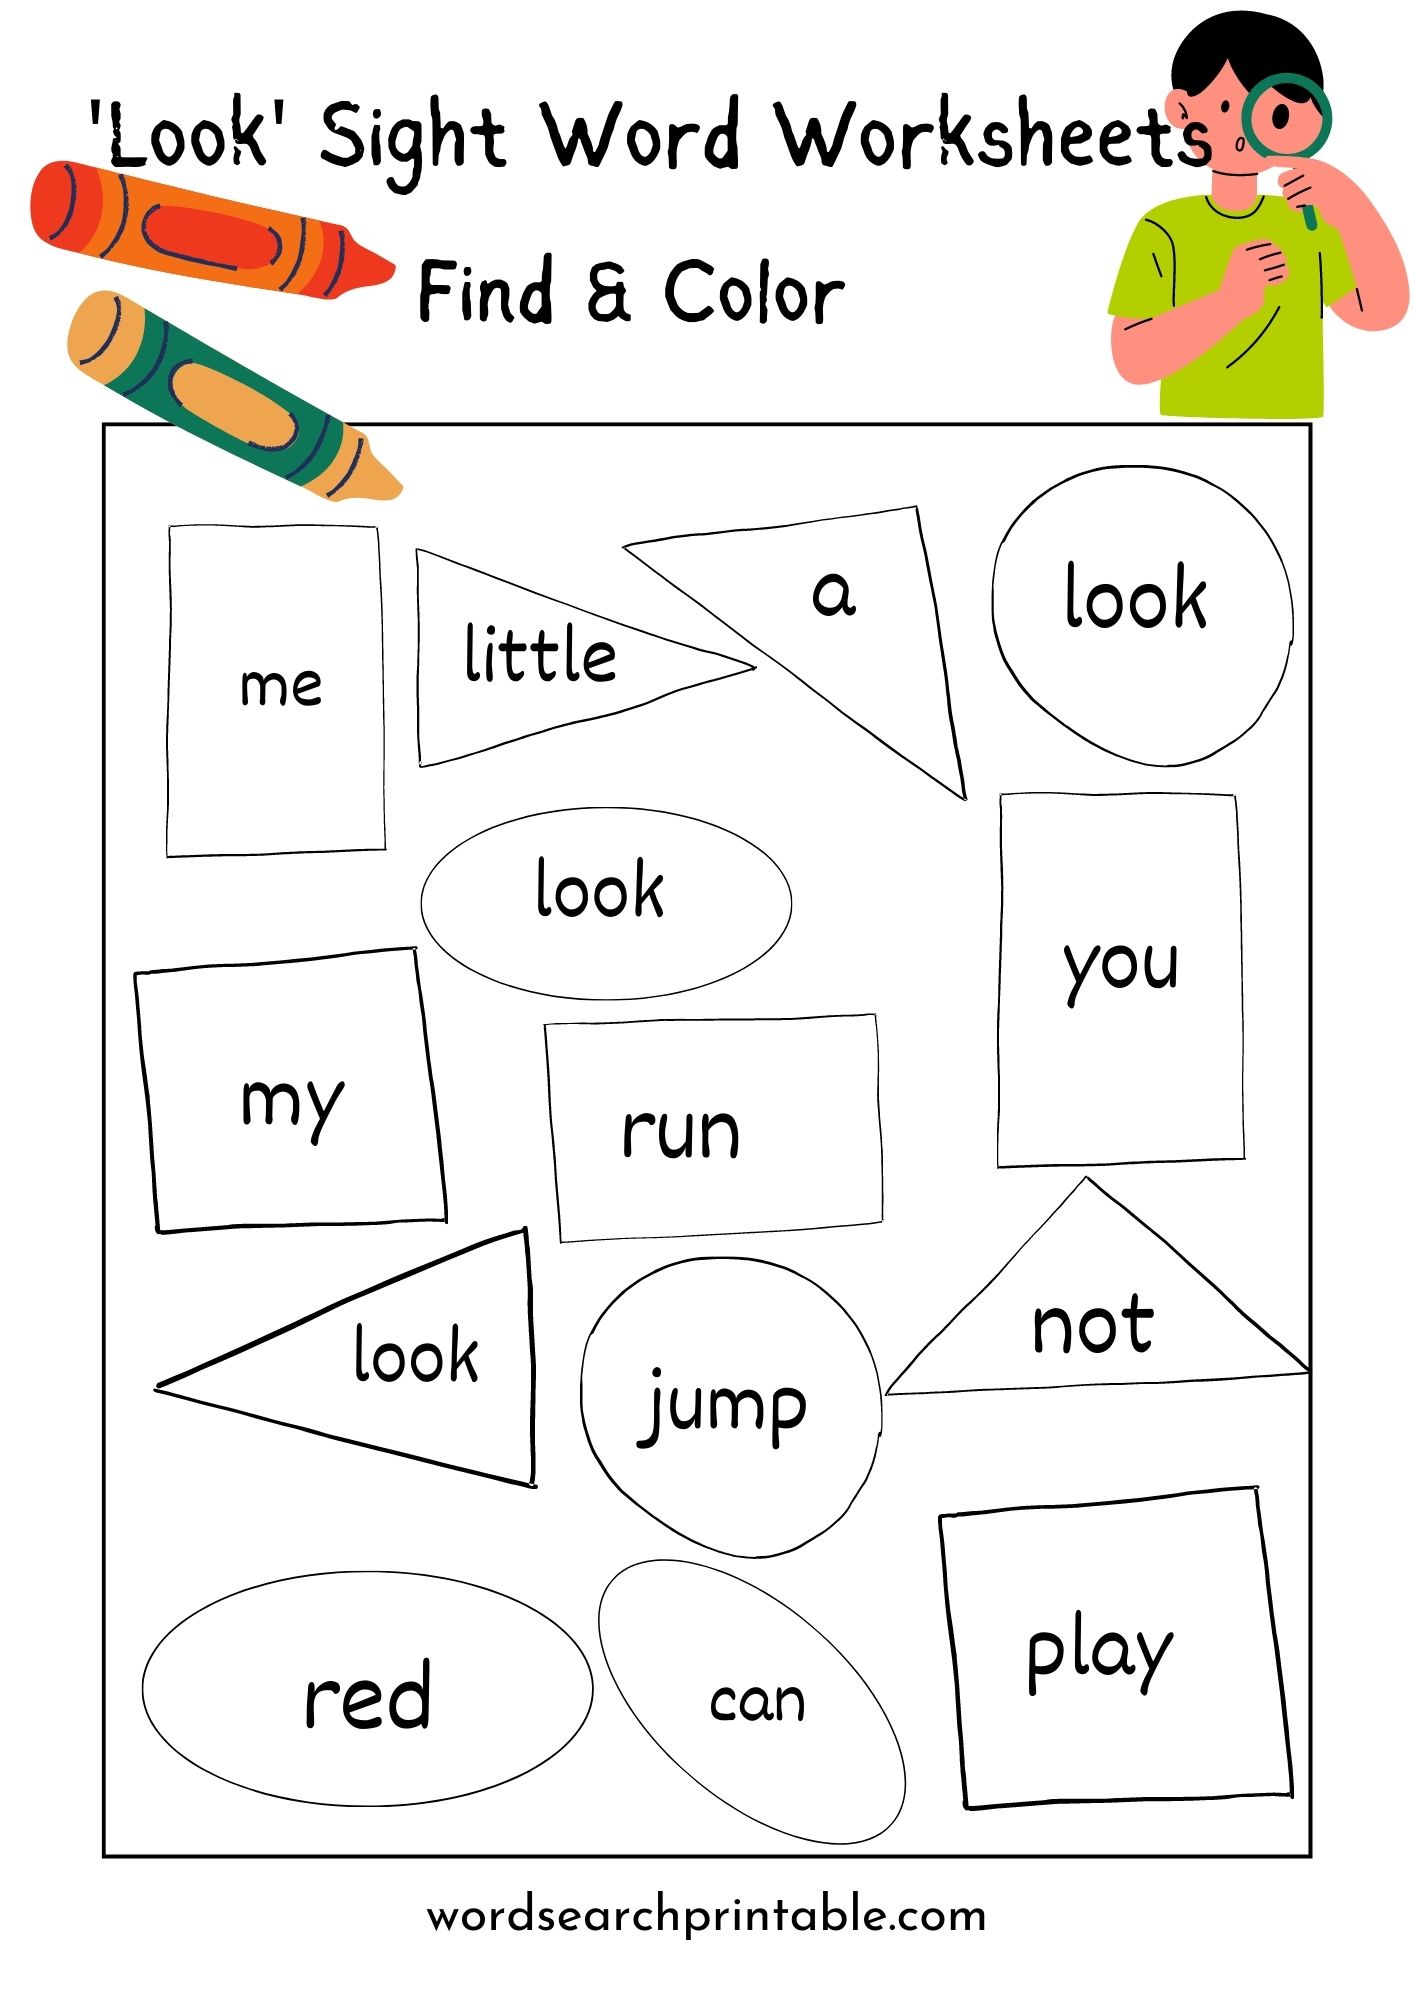 Find sight word Look and Color the geometric shape